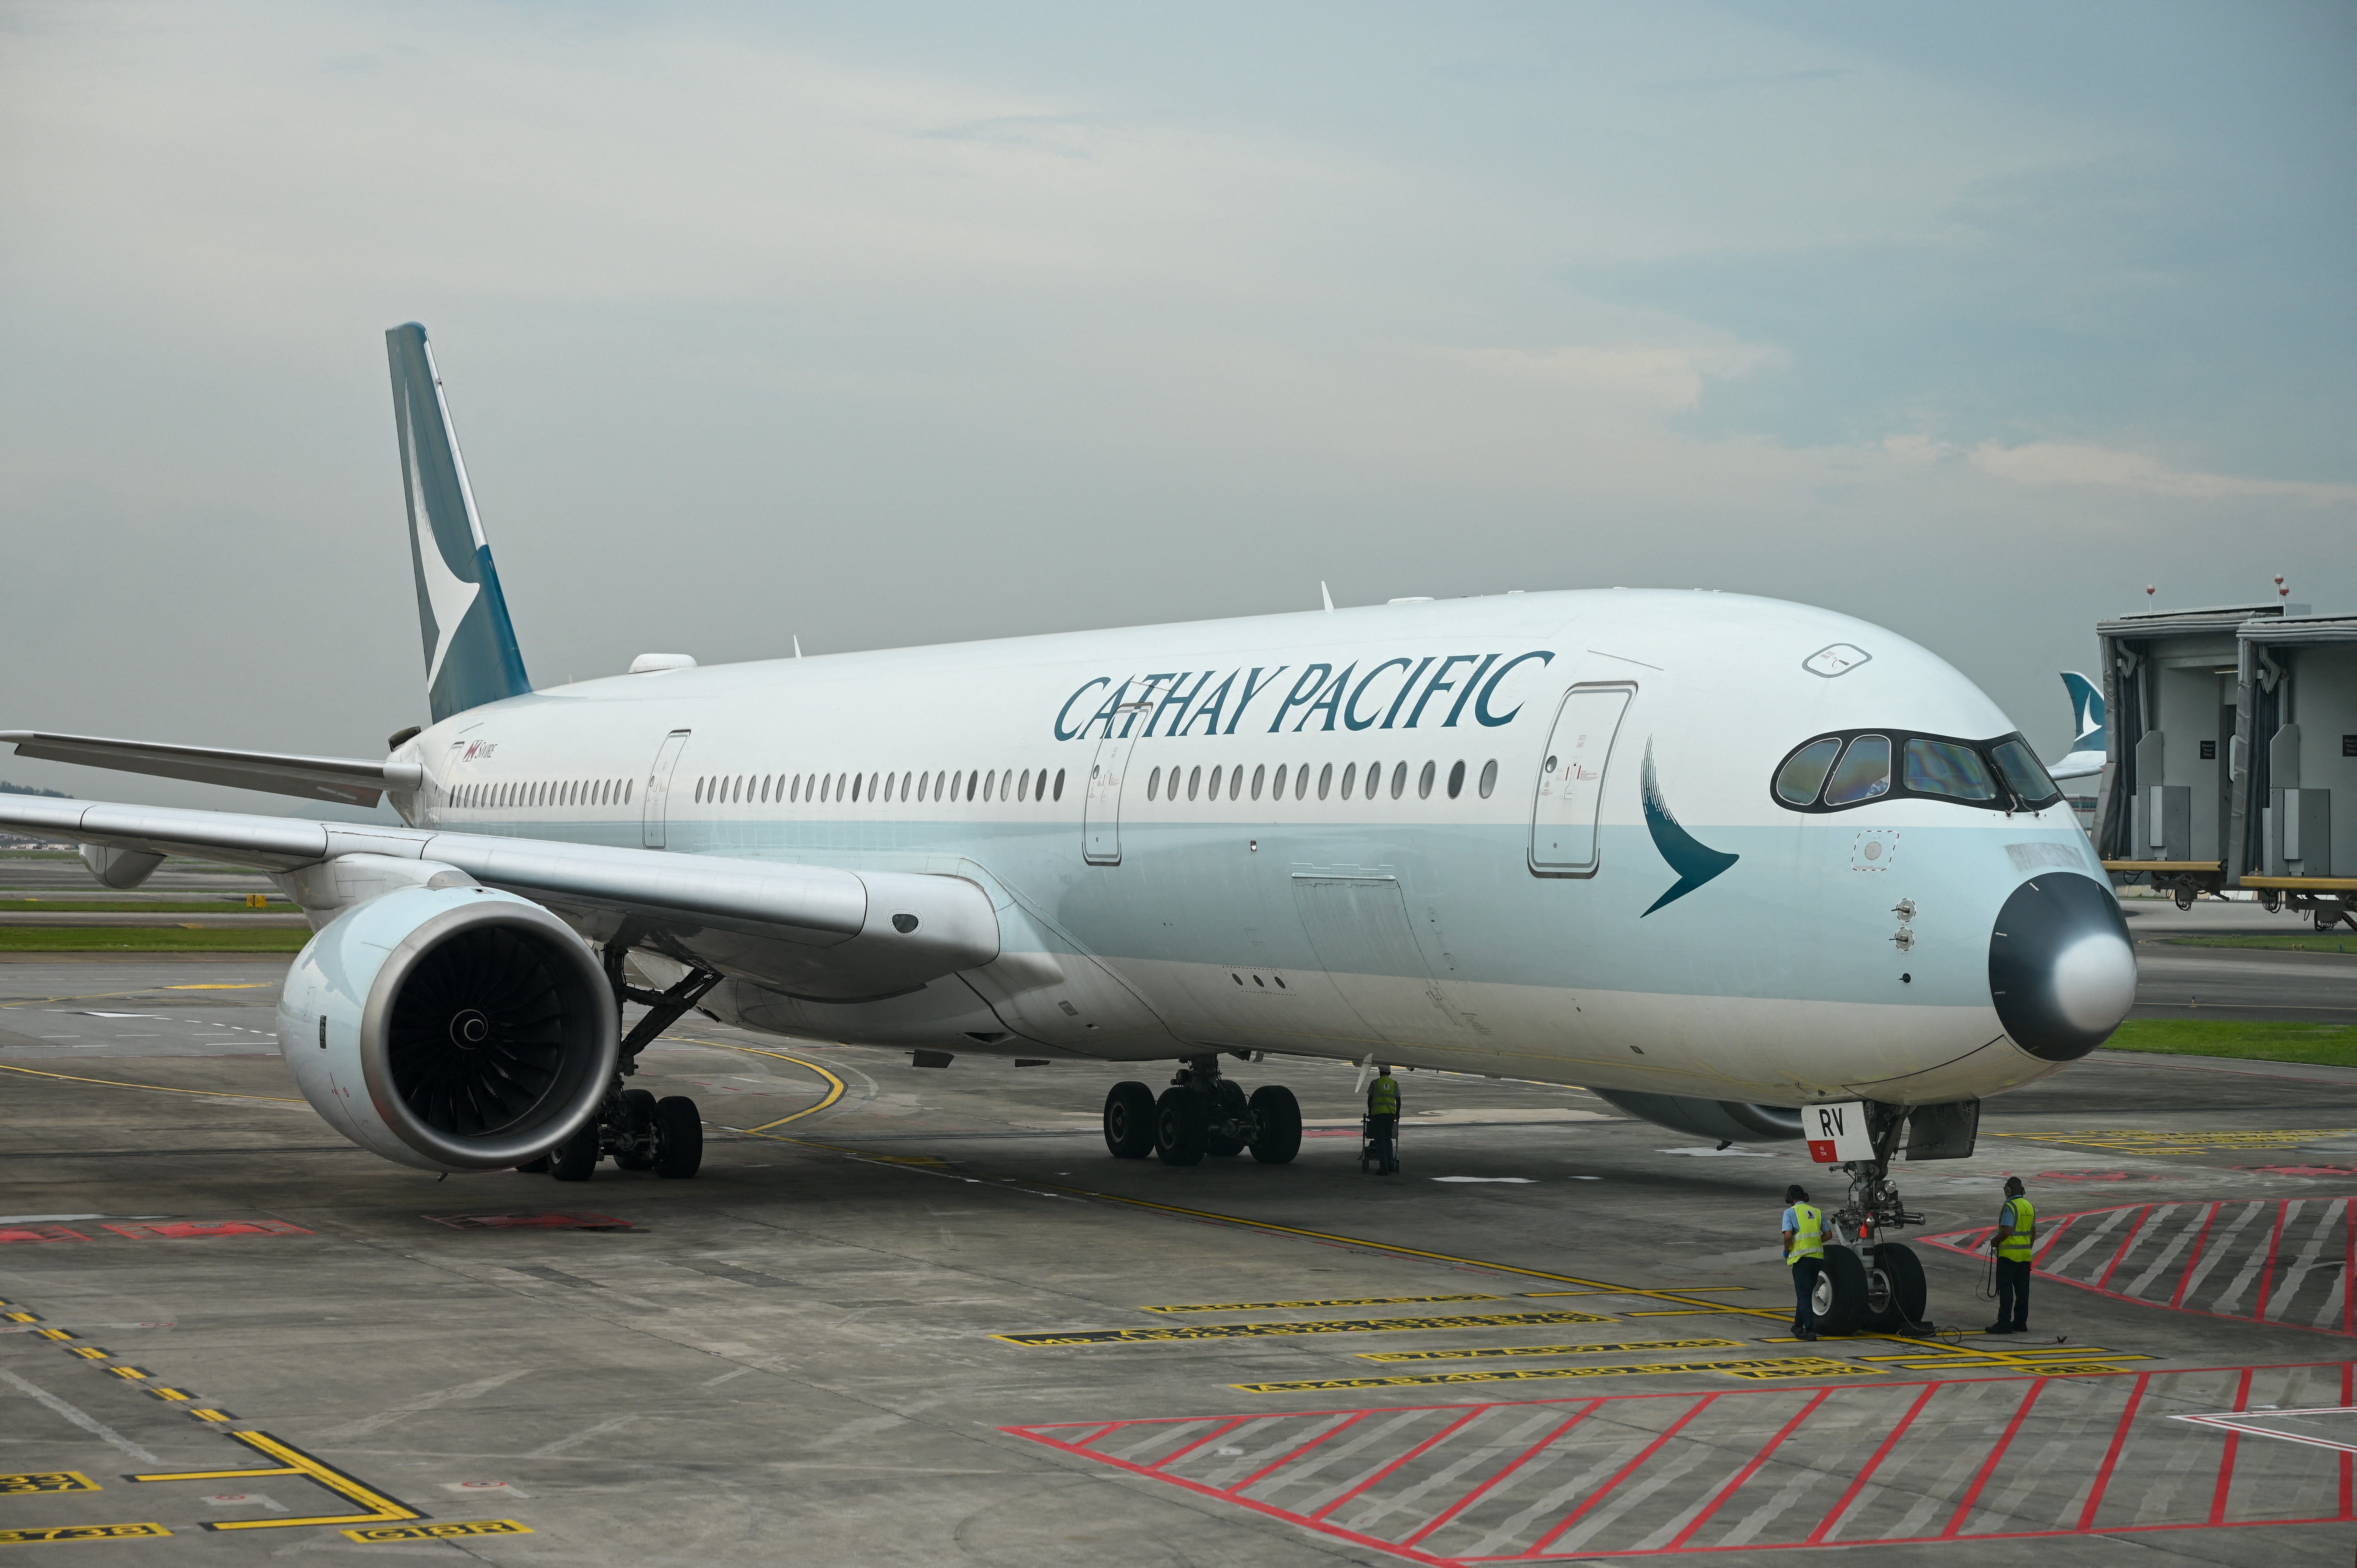 File image of a Cathay Pacific passenger plane arriving at Singapore’s Changi Airport Terminal 4 on 13 September 2022